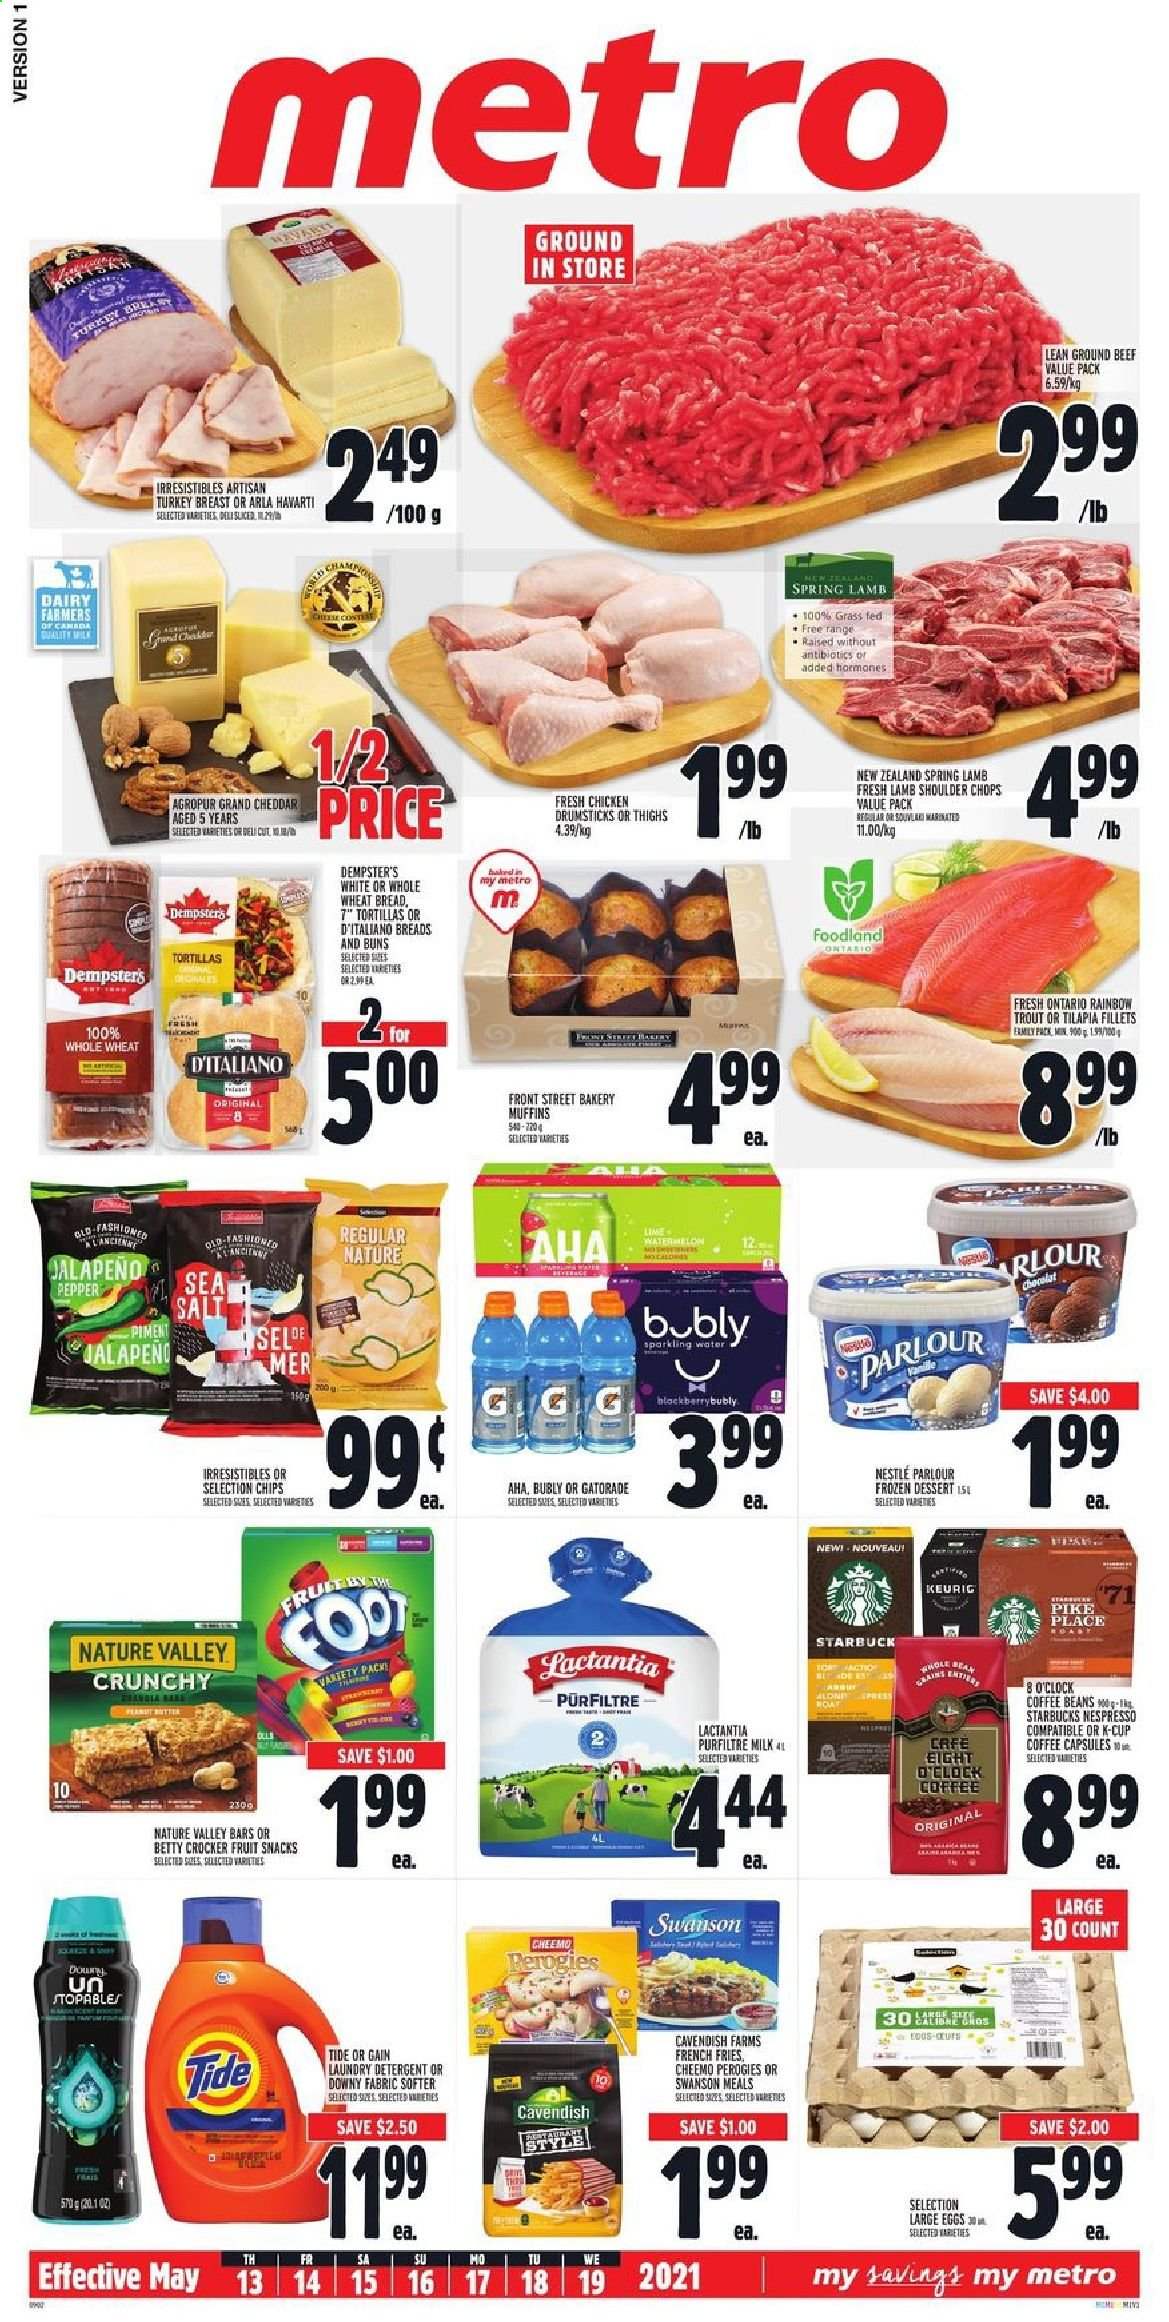 thumbnail - Metro Flyer - May 13, 2021 - May 19, 2021 - Sales products - tortillas, wheat bread, buns, muffin, jalapeño, watermelon, tilapia, trout, Havarti, cheese, Arla, milk, large eggs, potato fries, french fries, fruit snack, salt, Nature Valley, Gatorade, Nespresso, coffee beans, coffee capsules, Starbucks, K-Cups, Keurig, turkey breast, chicken drumsticks, chicken, turkey, beef meat, ground beef, lamb meat, lamb shoulder, Gain, Tide, laundry detergent, Downy Laundry, clock, Nestlé. Page 1.